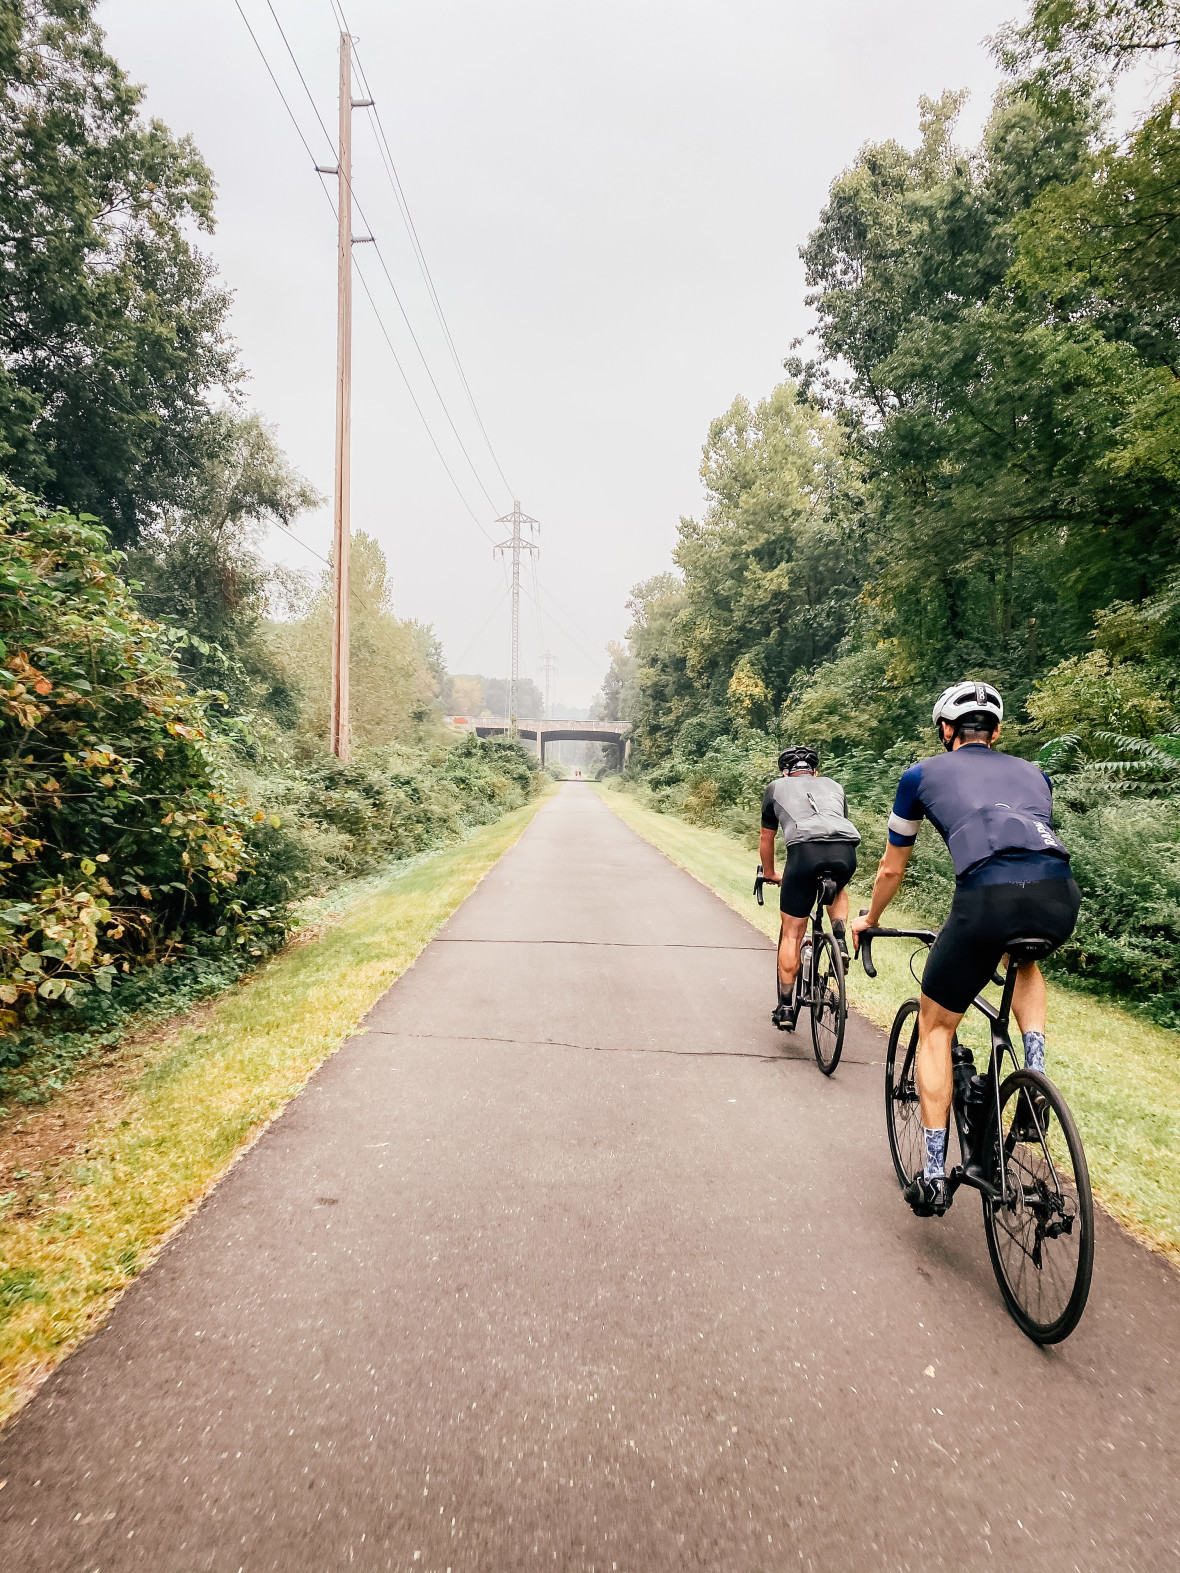 Two bicyclists riding a paved bike path towards bridge underpass in distance